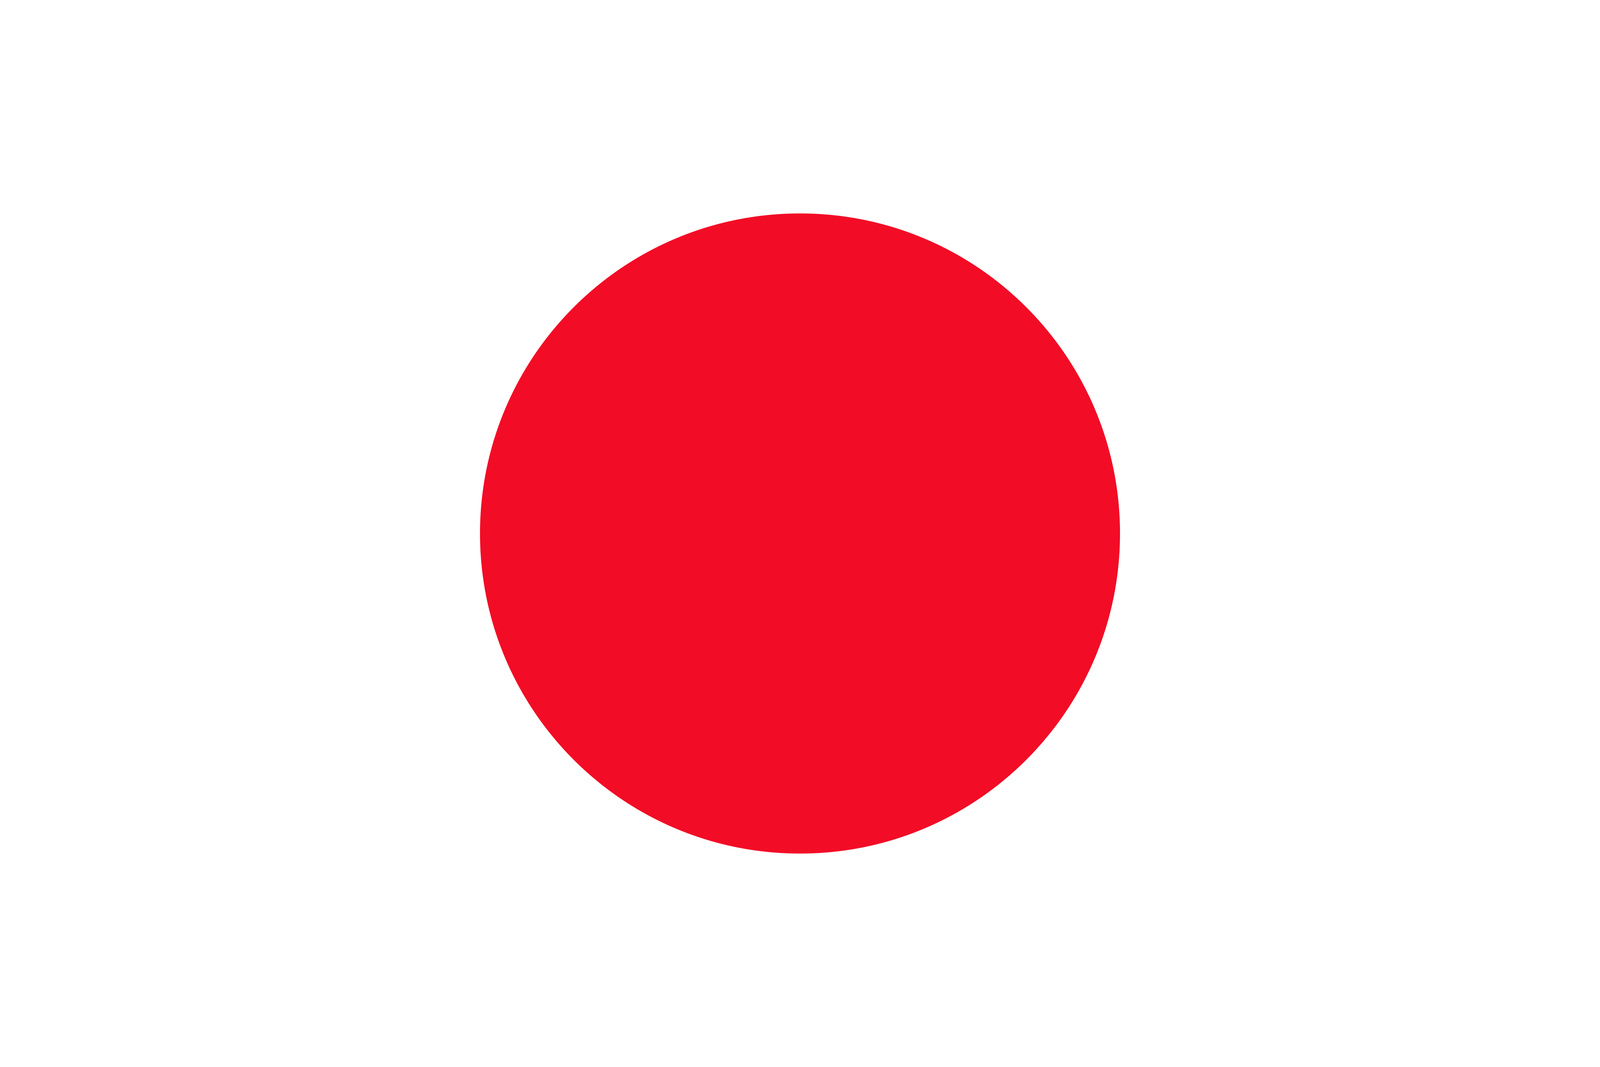 Cutout Image of the Flag of Japan